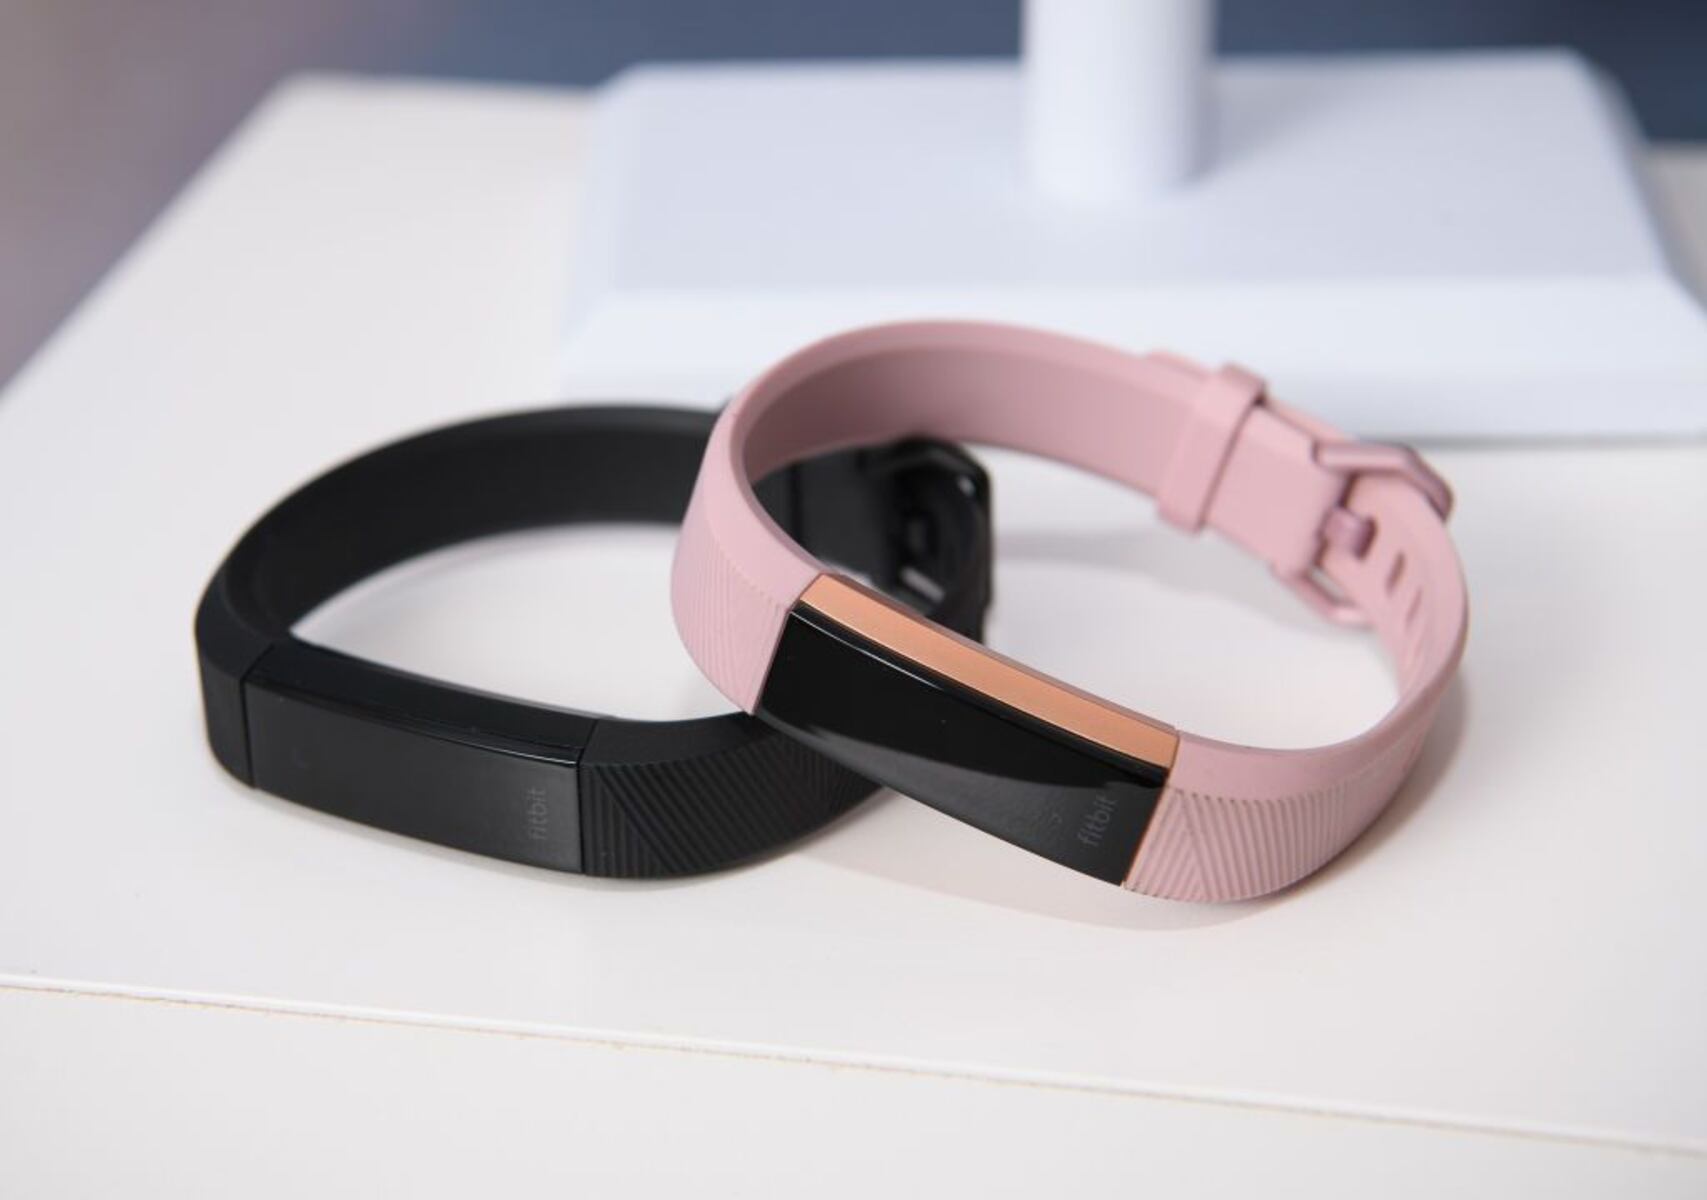 Power Up: Turning On Your Fitbit Alta